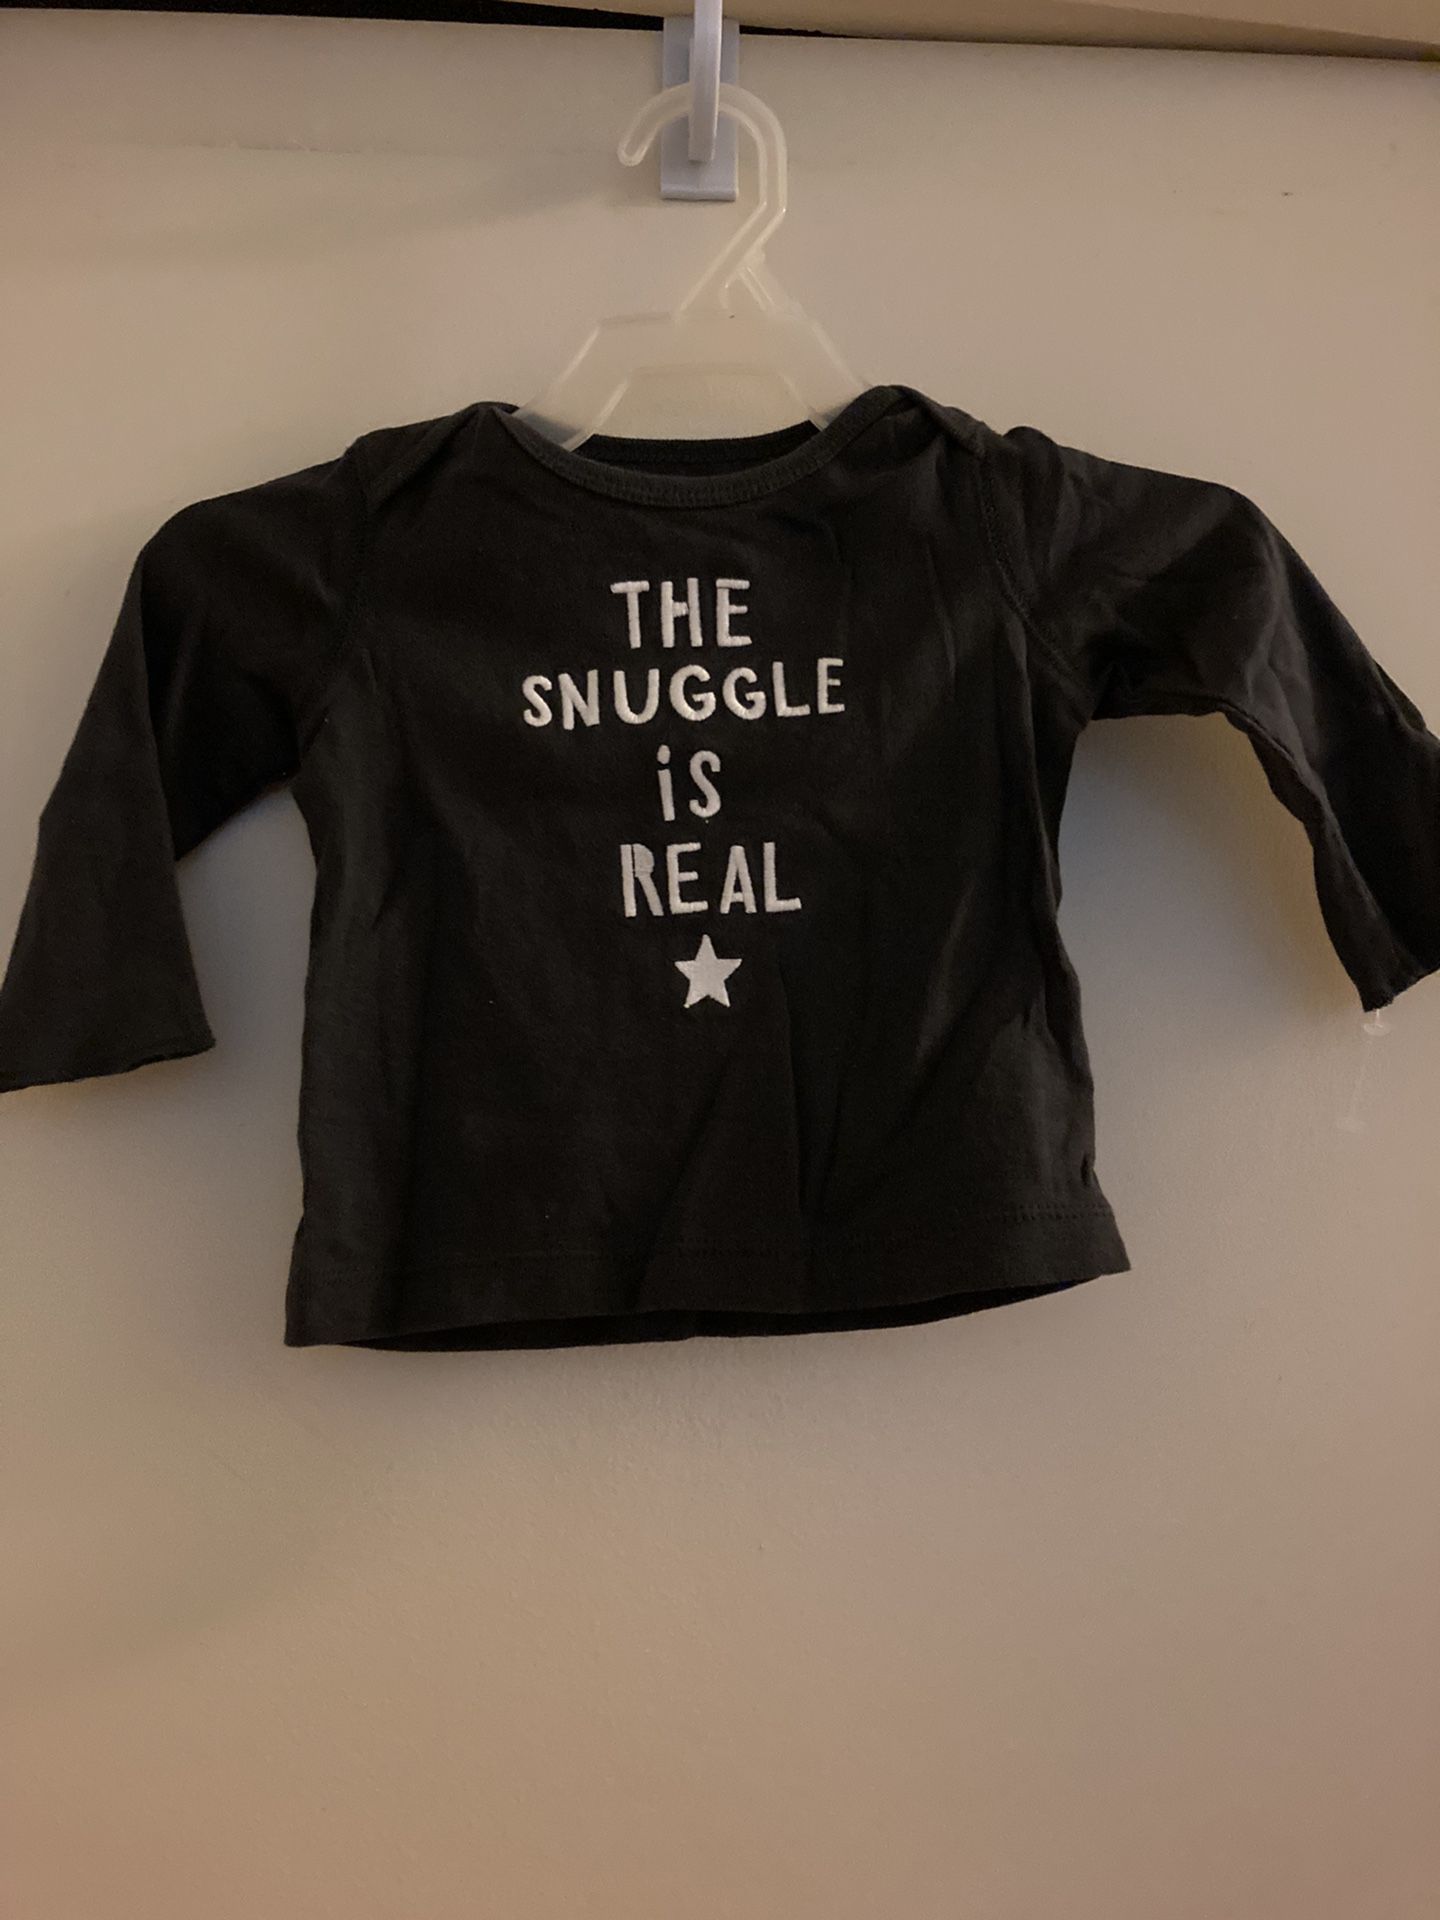 Black Long Sleeve “The Snuggle Is Real” T-shirt (Please Read Description For Price)